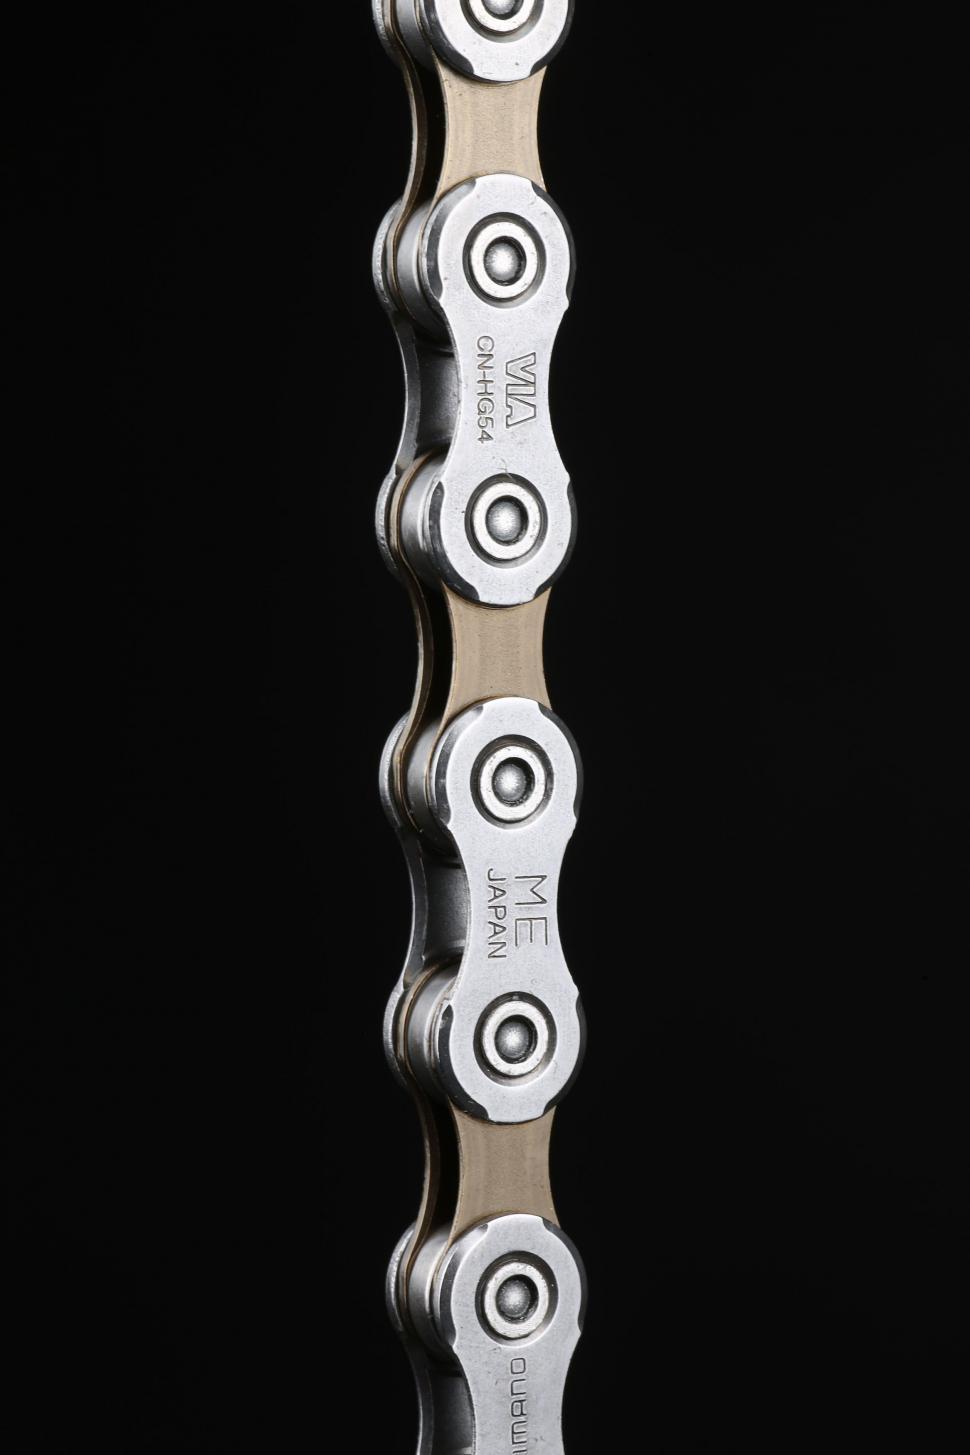 Free Image of Bicycle Chain 